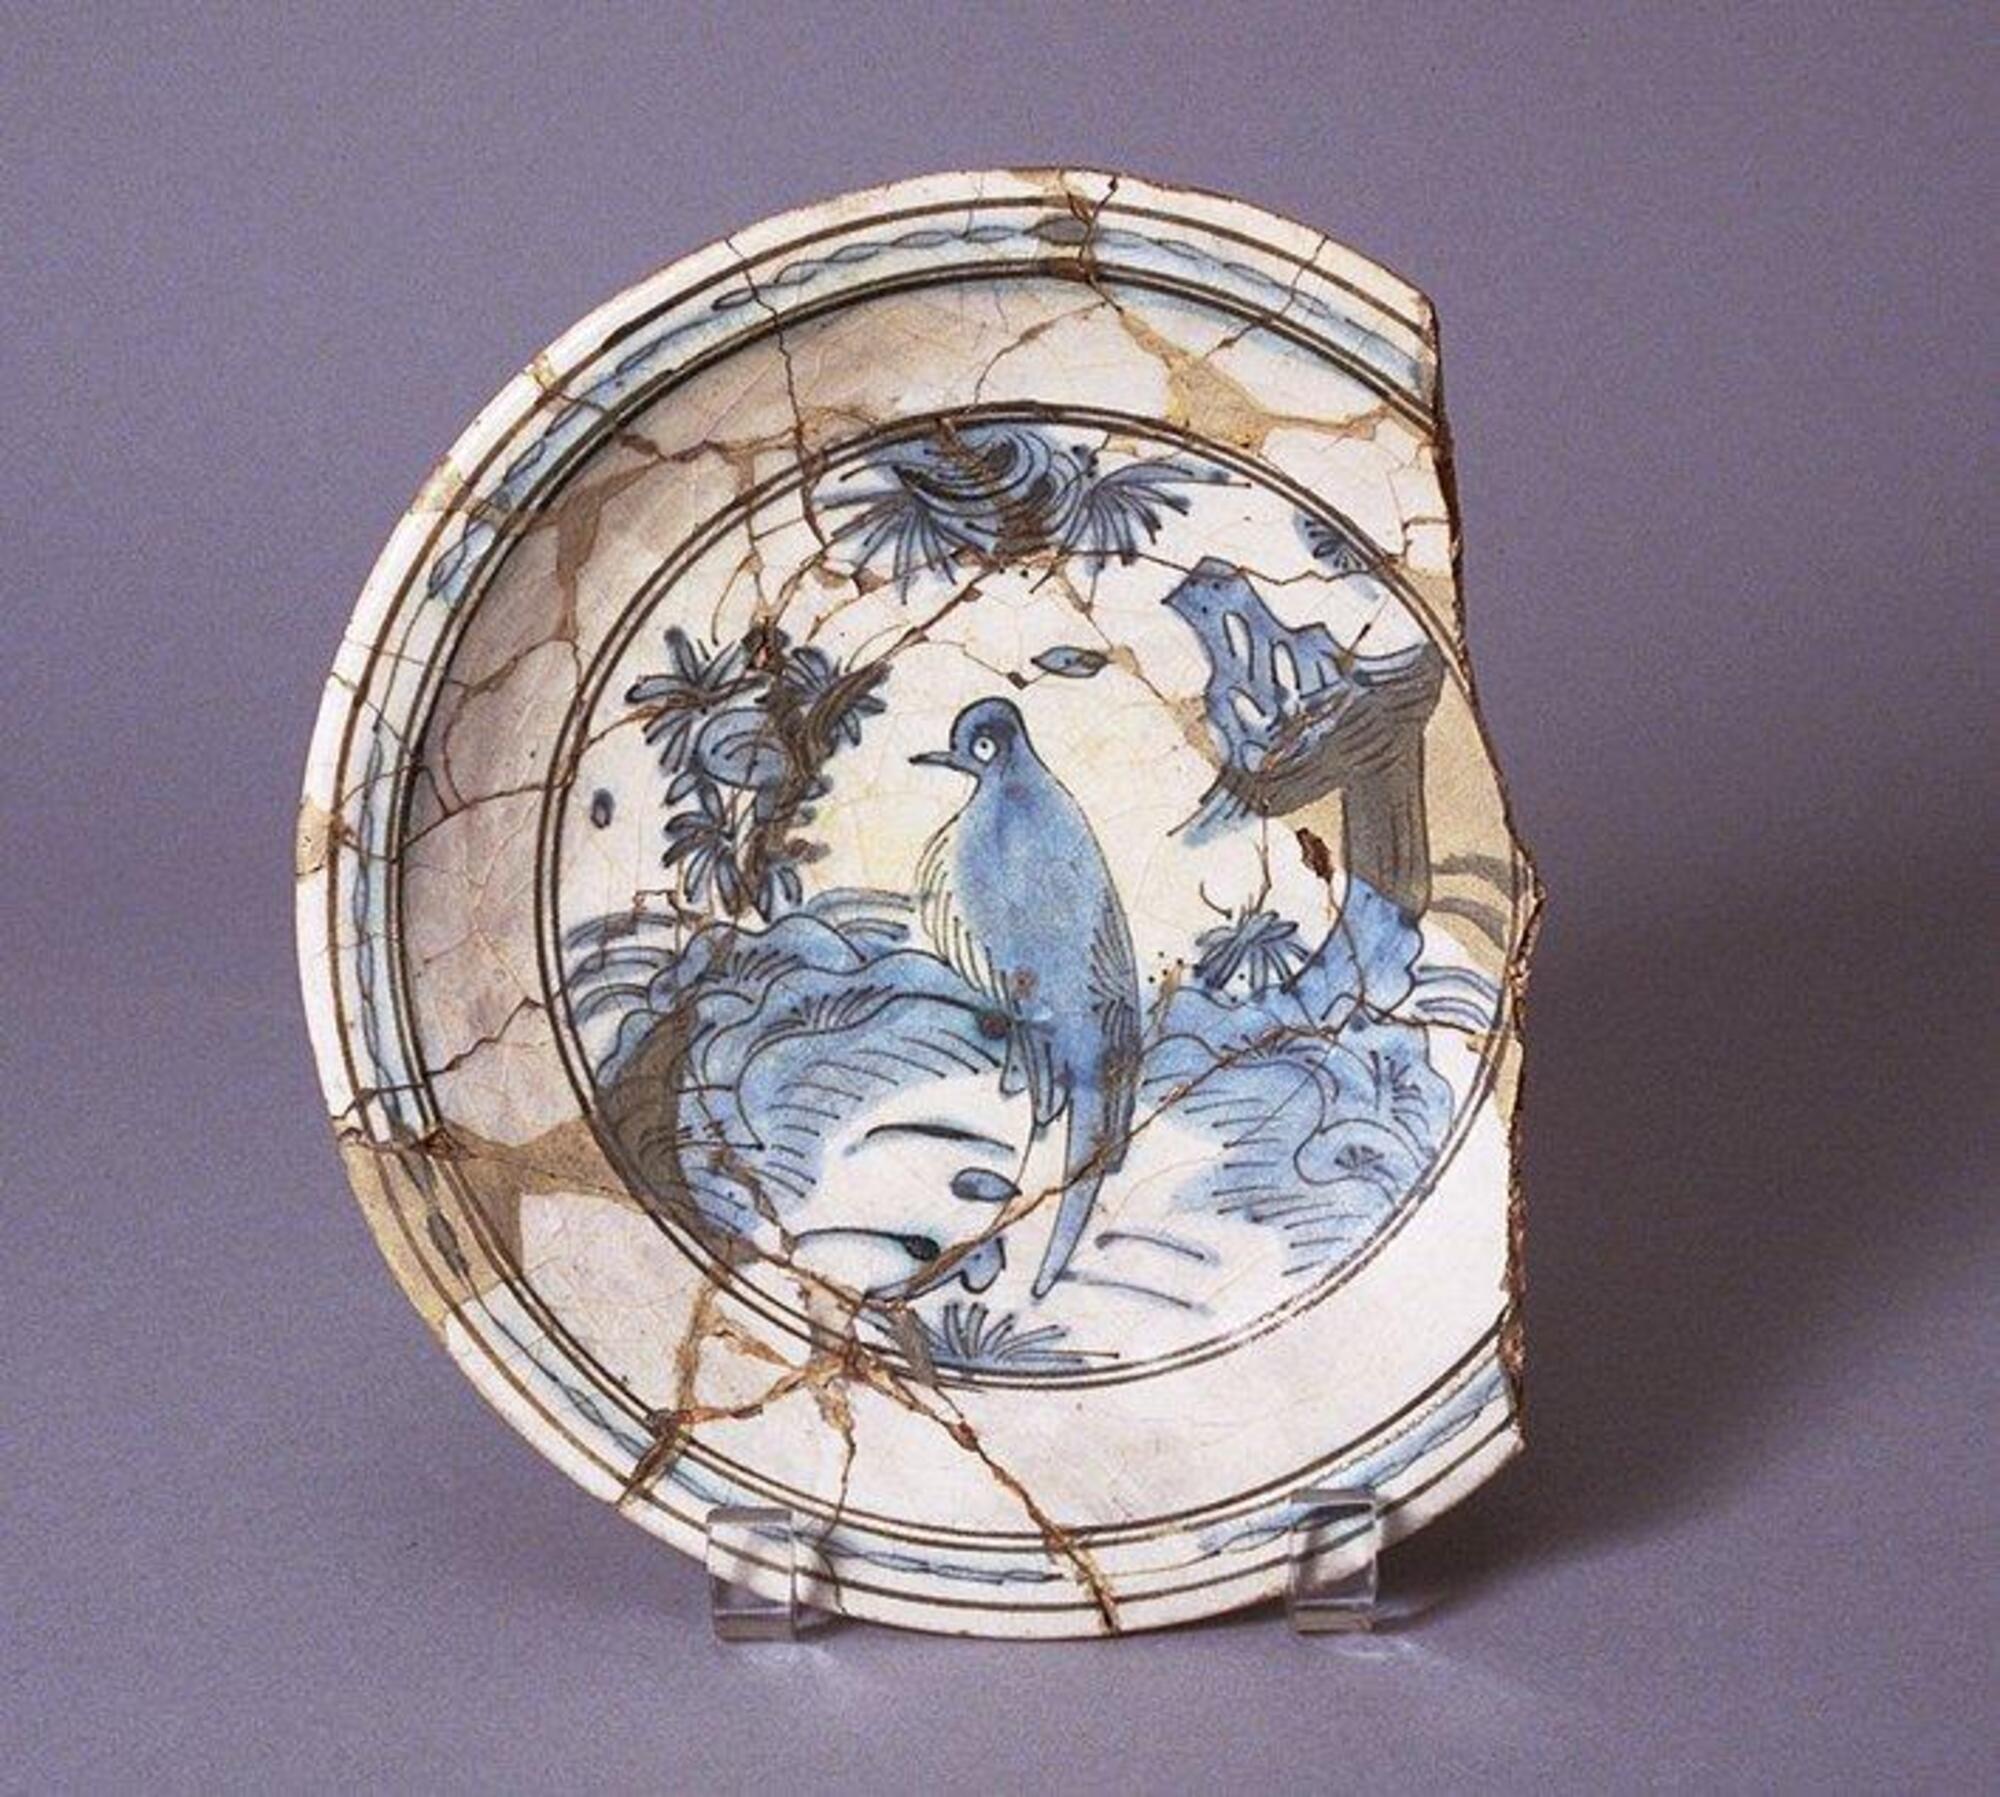 A plate with missing side. It has depictions in blue.